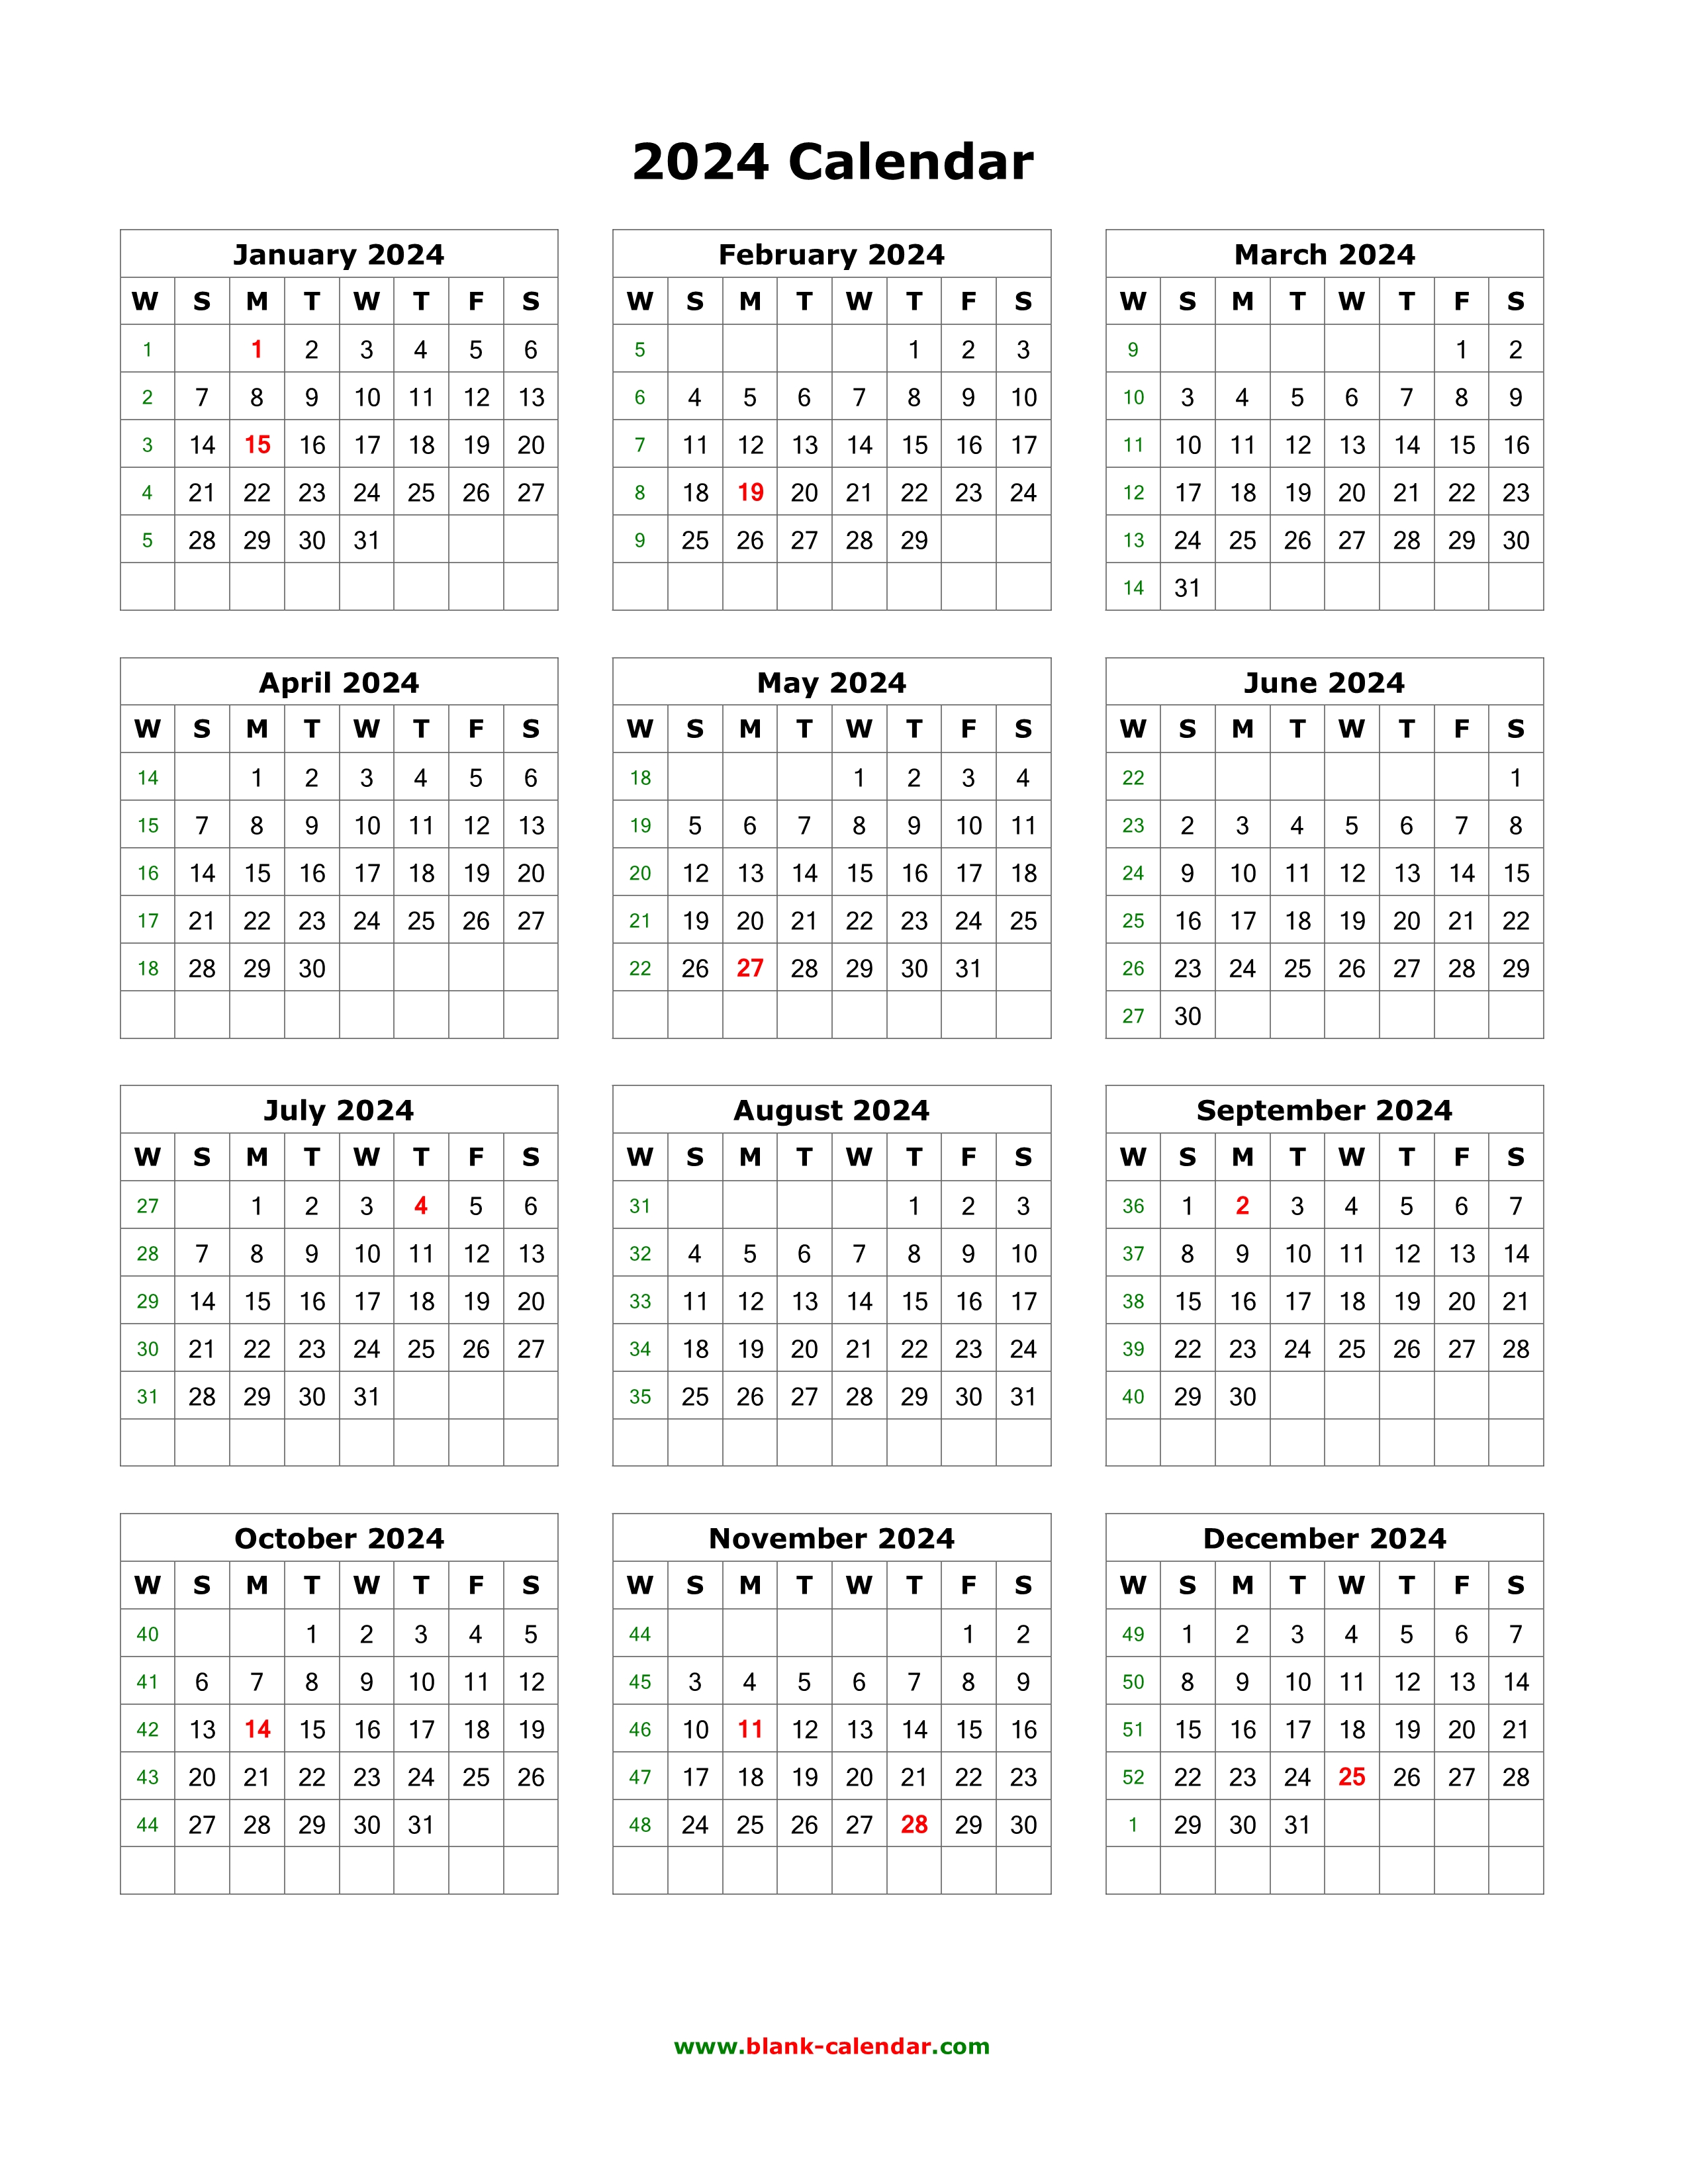 Download Blank Calendar 2024 (12 months on one page, vertical)